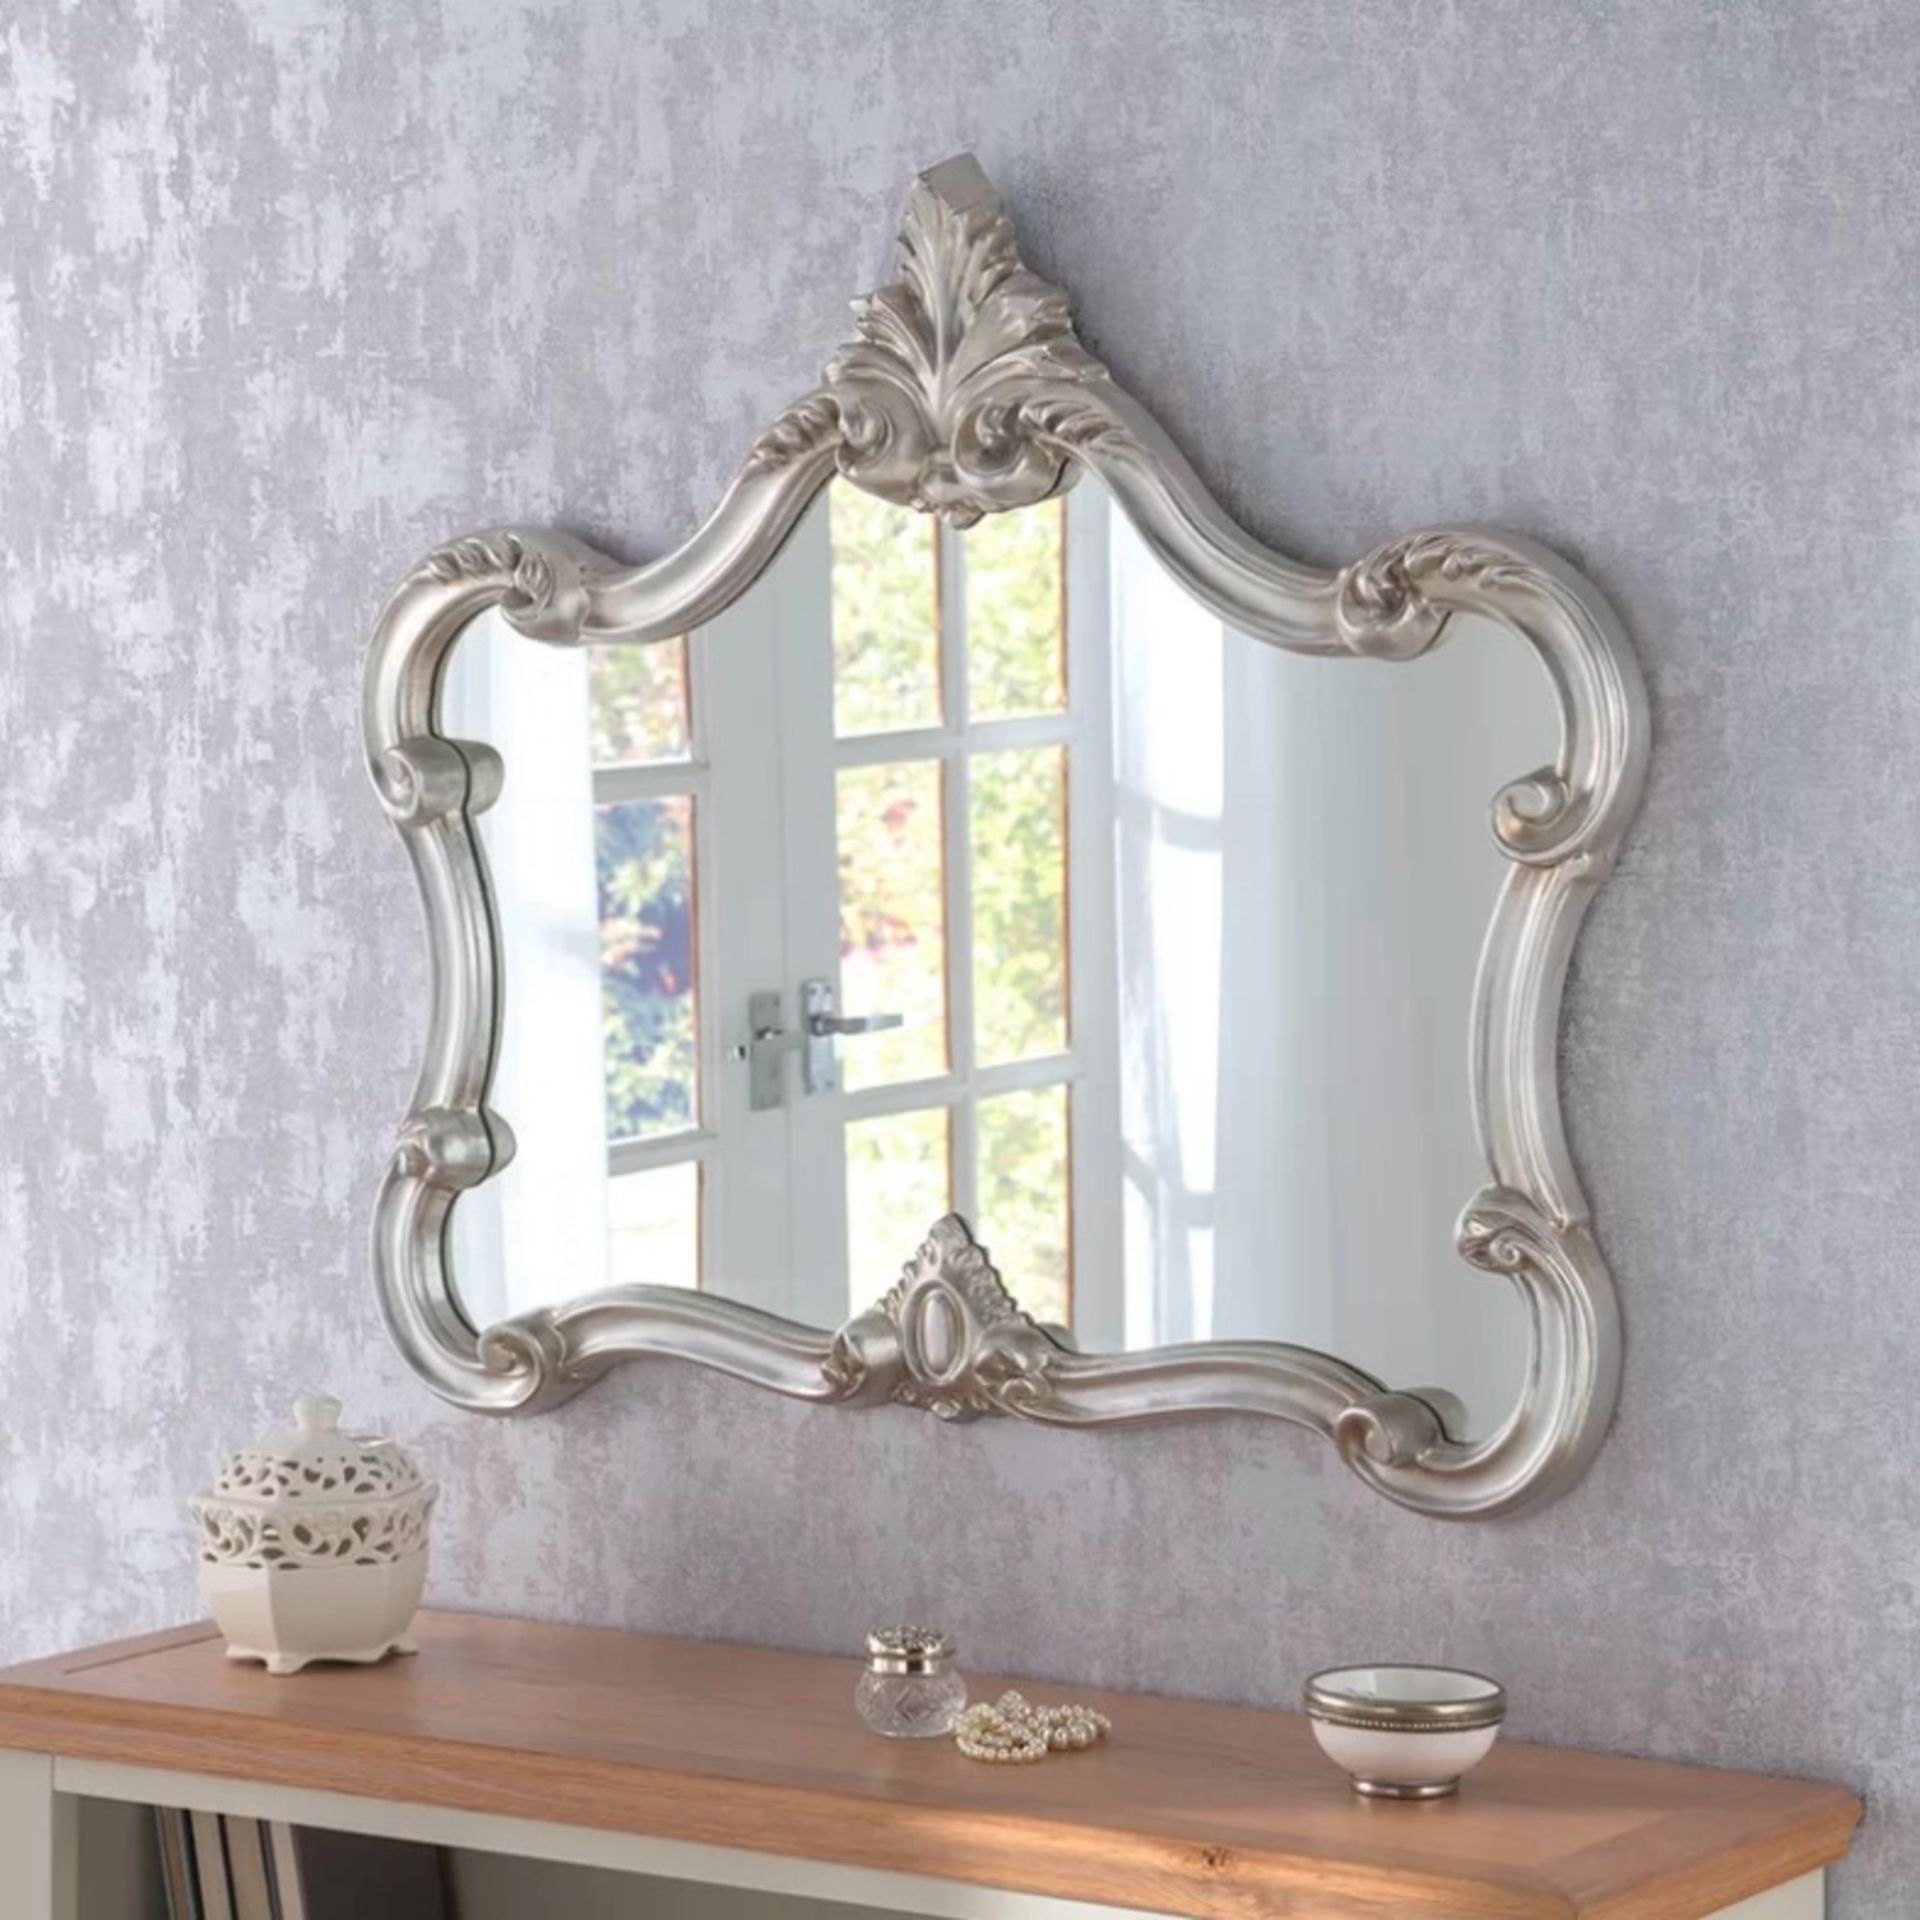 Mantle Accent Mirror Arch/Crowned top ornate silver painted over mantle mirror 69cm H x 81cm W x 6cm